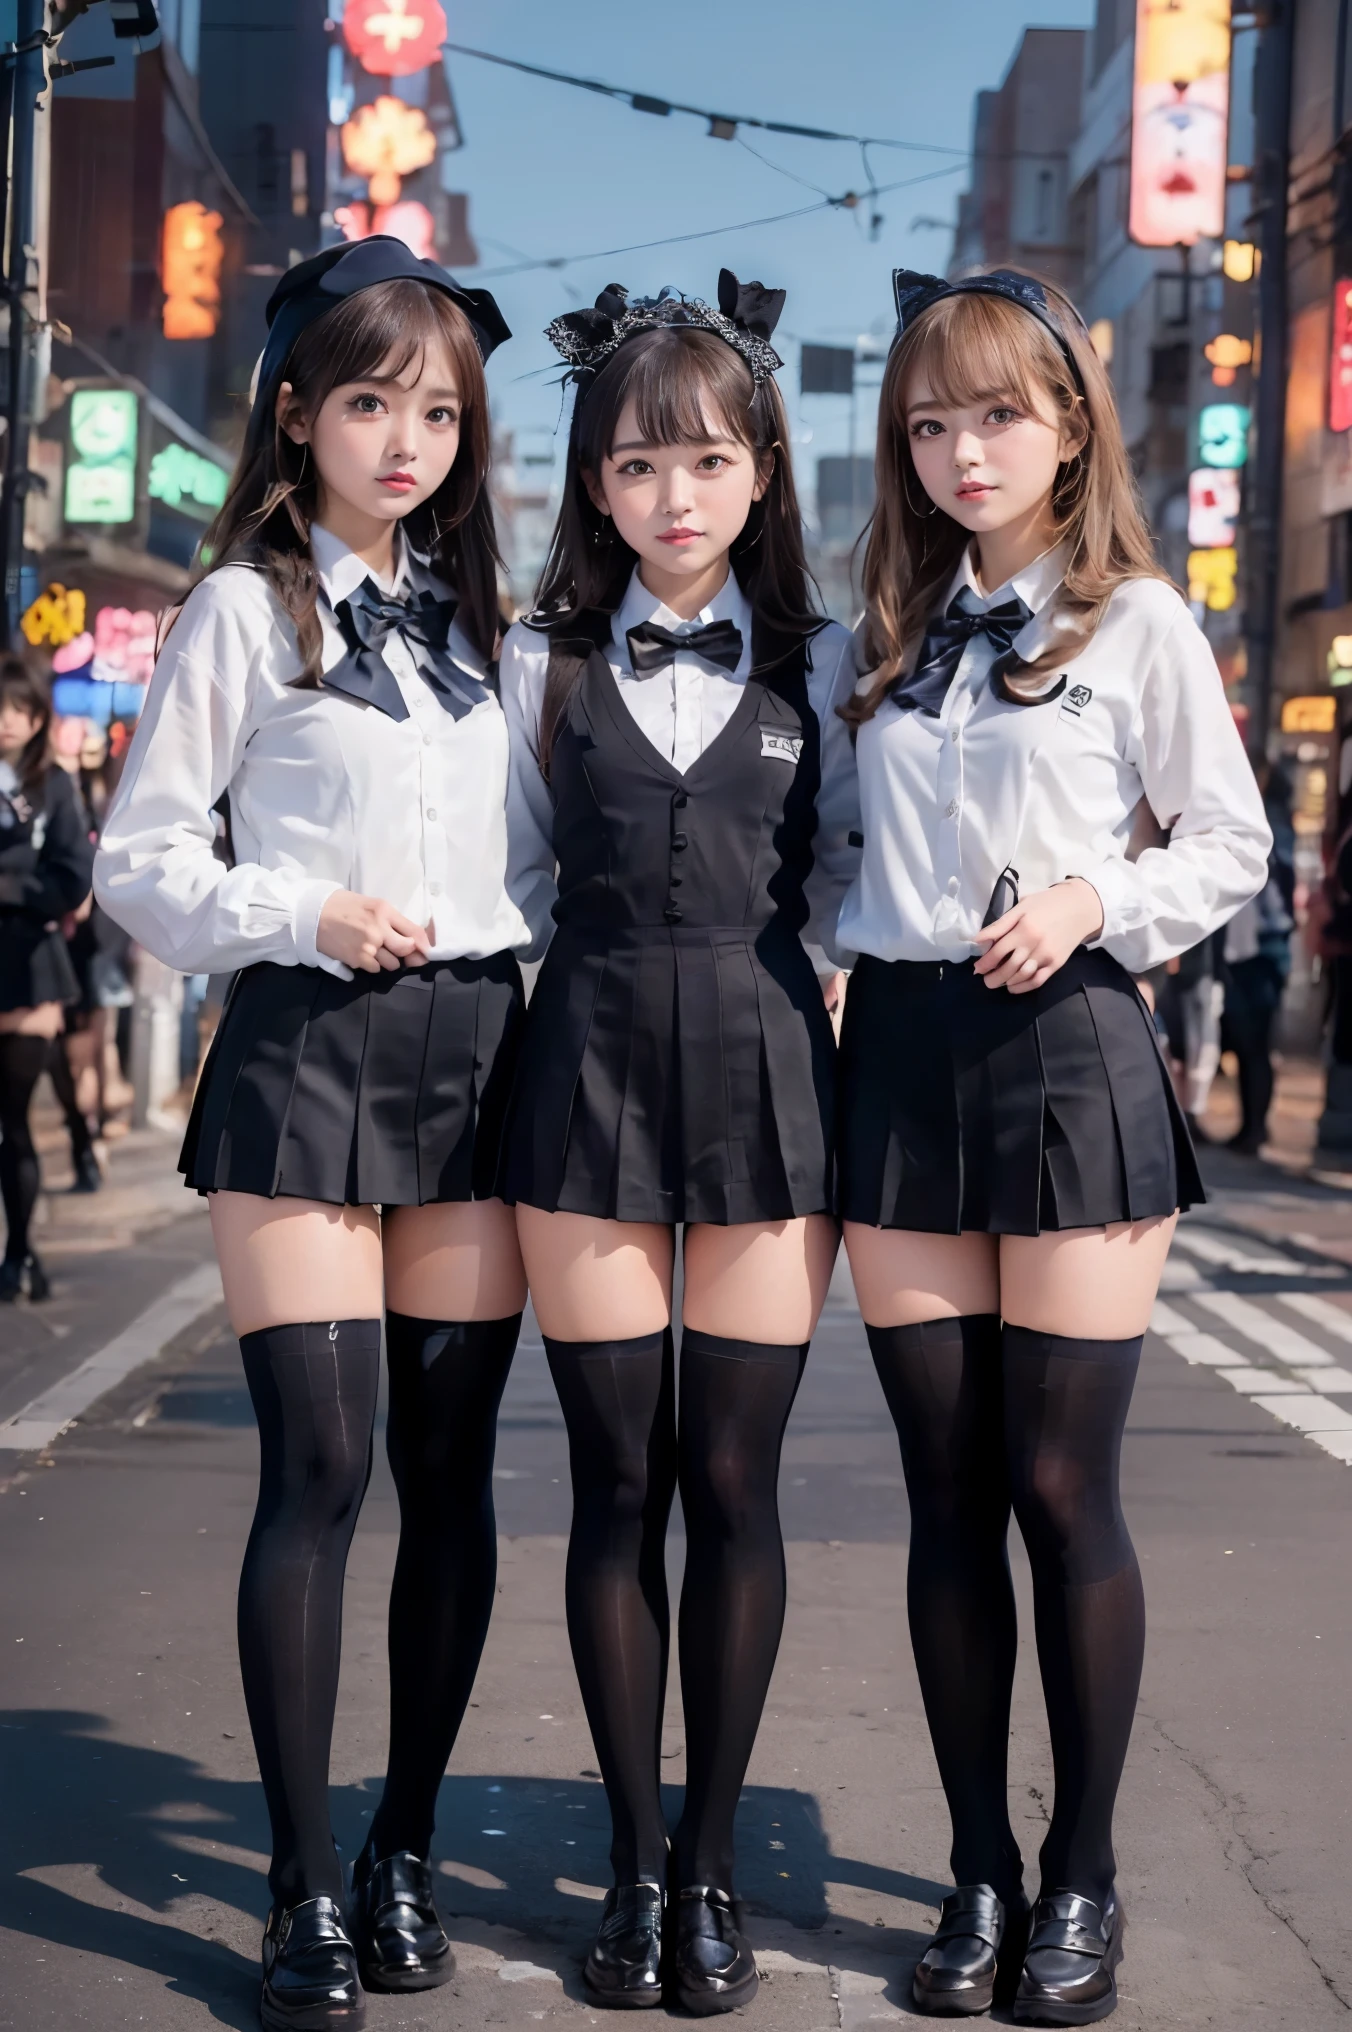 (I photographed the whole body)、street snap、A baby-faced girl wearing a short skirt and bow tie stands in a neon street at night..(expensive)There are three gals、(3 girls)、(gal)、amazingly cute 、Microsailor suit、Winter clothes、Japanese school black uniform、(big breasts、The shirt opens at the chest, expose a lot of cleavage.)、Girl in surreal female uniform、Wearing a dark blue uniform、 Pause、Full body Esbian、nice skin、glowing skin、nice thighs、(long legs)、(wide thighicro hining thighs、With garter、(opaque black knee high socks)、((By everyone)(I definitely wear black knee socks that go above the knee.))、I&#39;I am wearing high heels、Japanese high school 、Nogizaka Idol、korean idol、Invite you inside、Inviting eyes